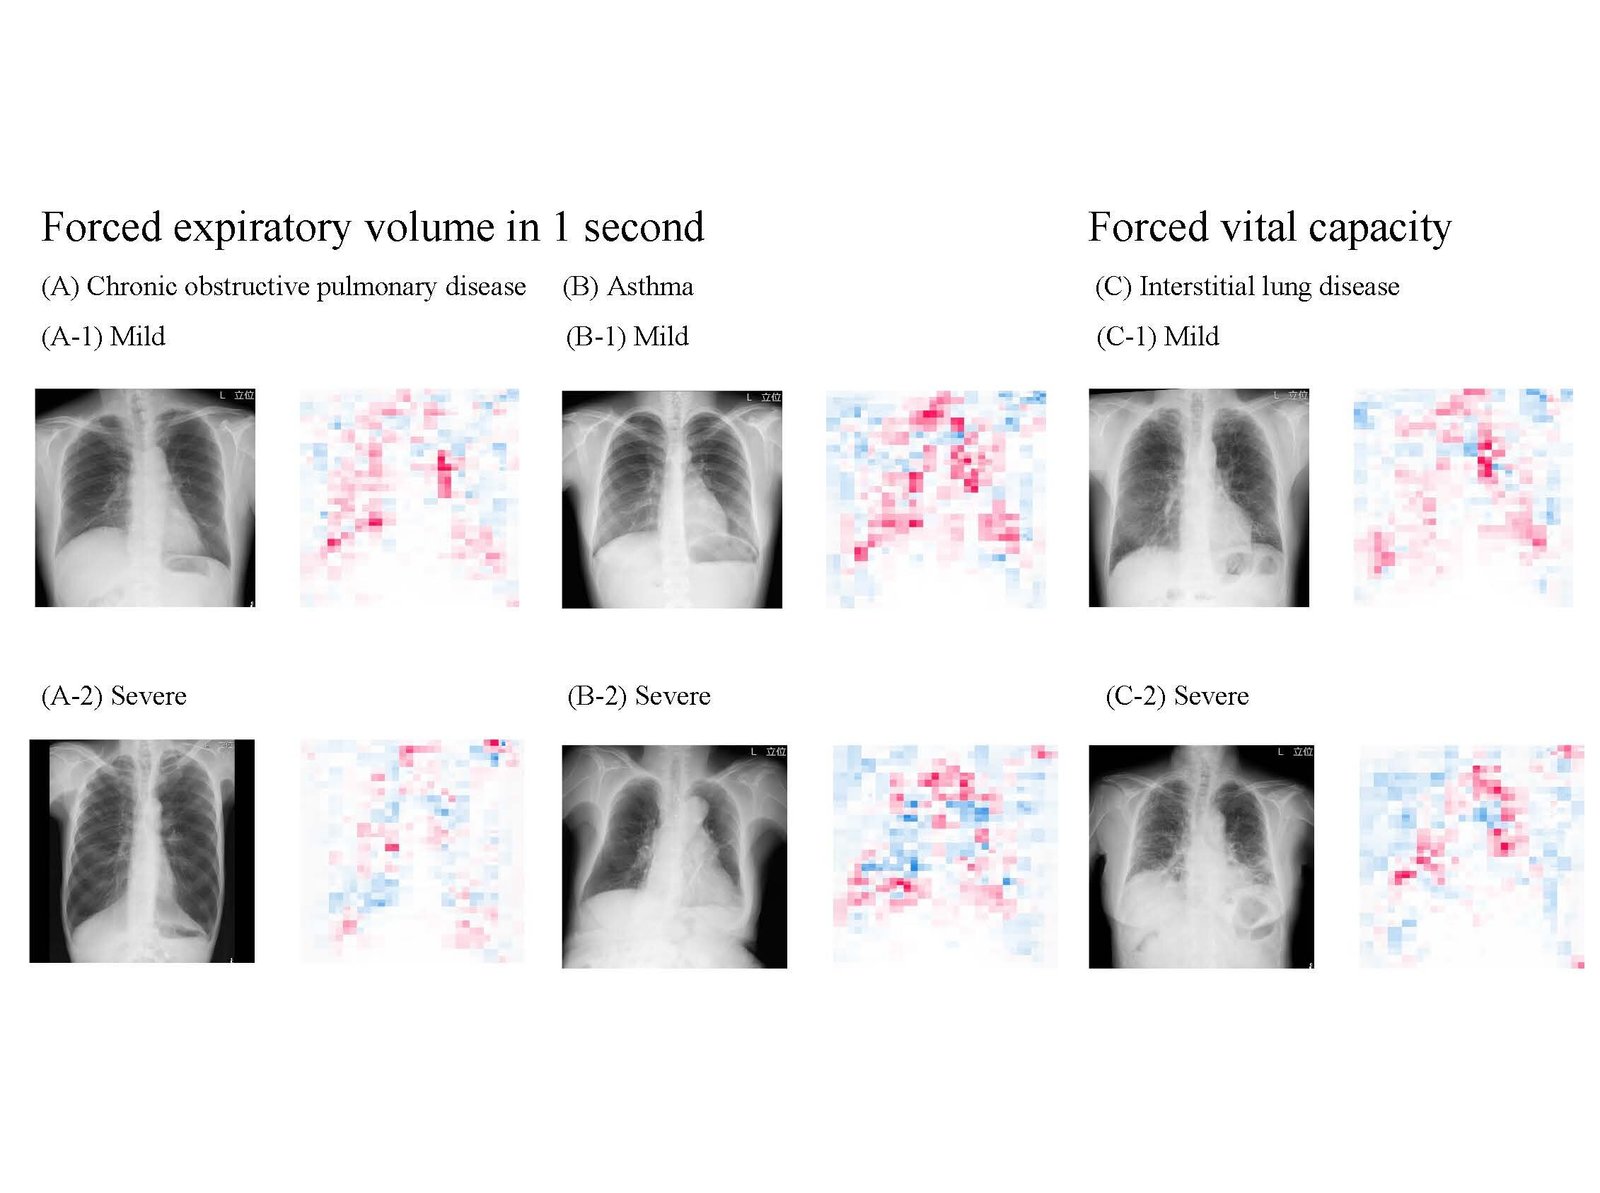 Highly accurate AI model can estimate lung function just by using chest X rays